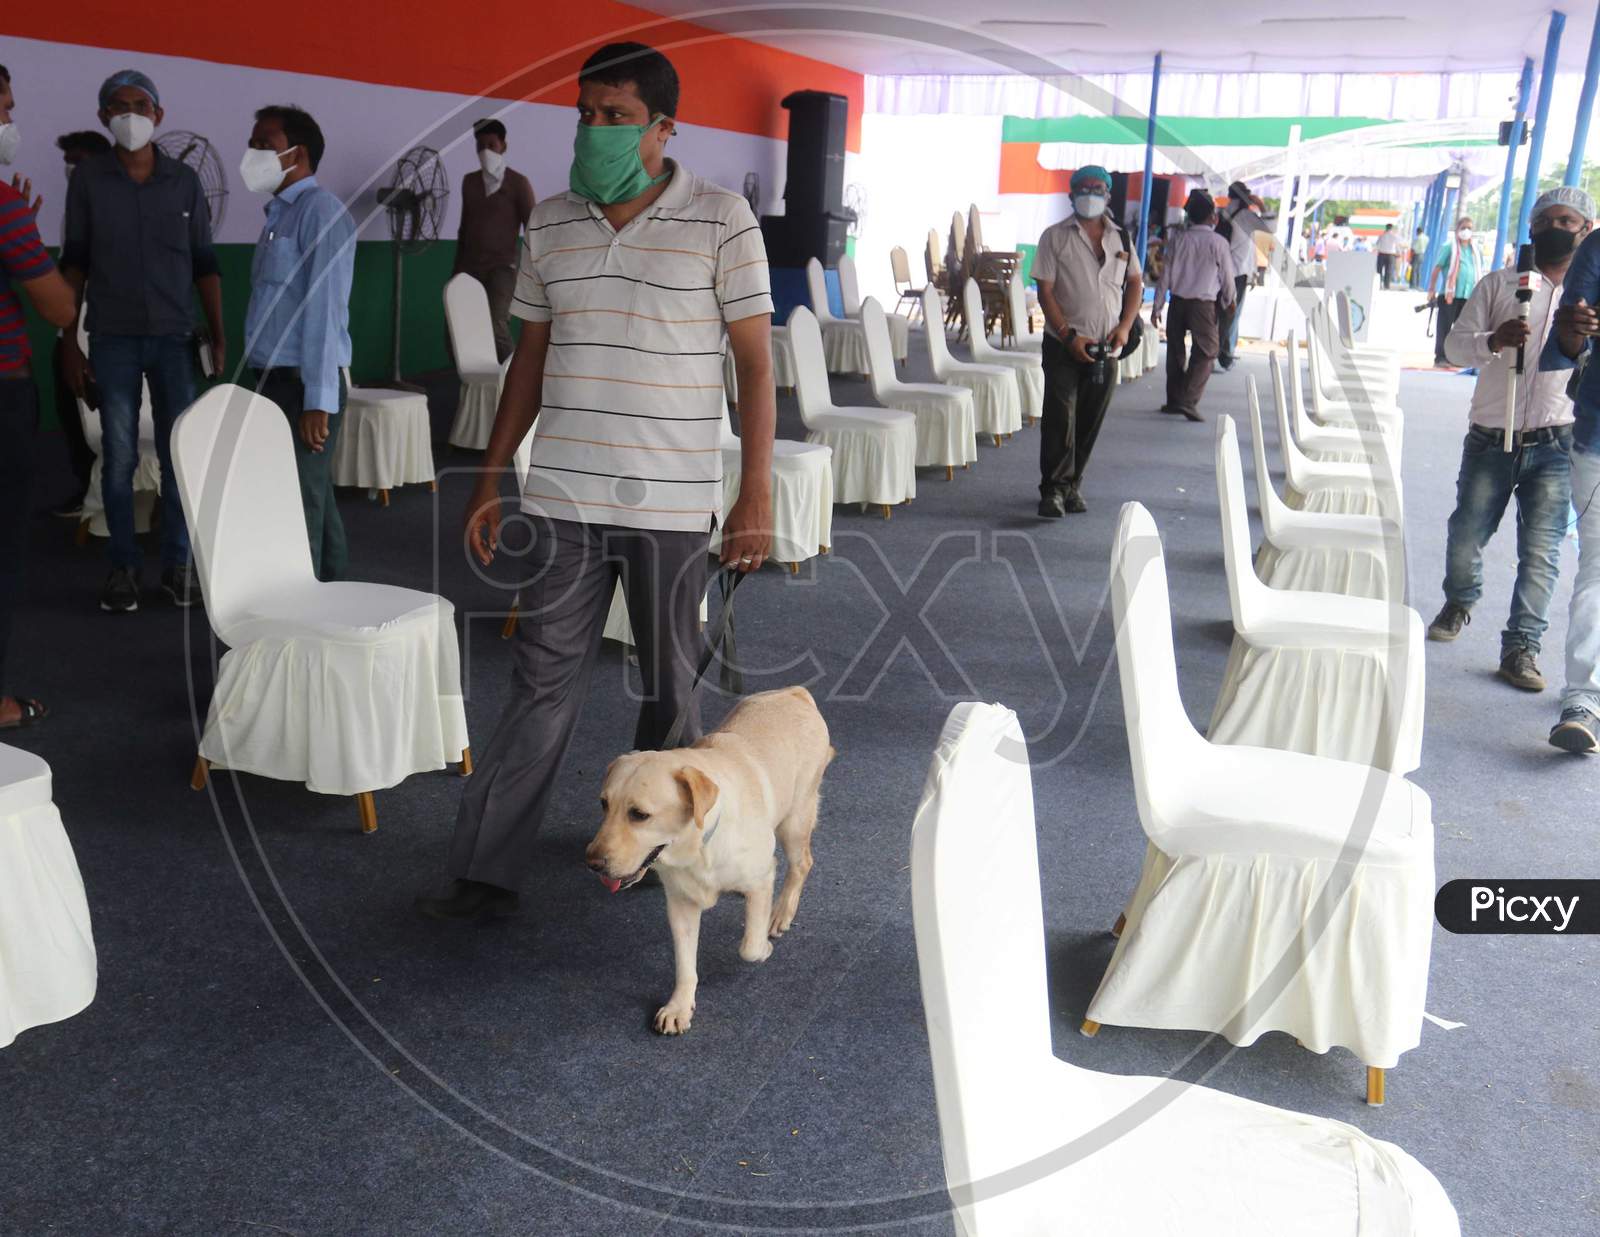 Security persons check the main stage with sniffer dogs ahead of Independence Day celebrations at Indira Gandhi Sarani in Kolkata on August 14, 2020.